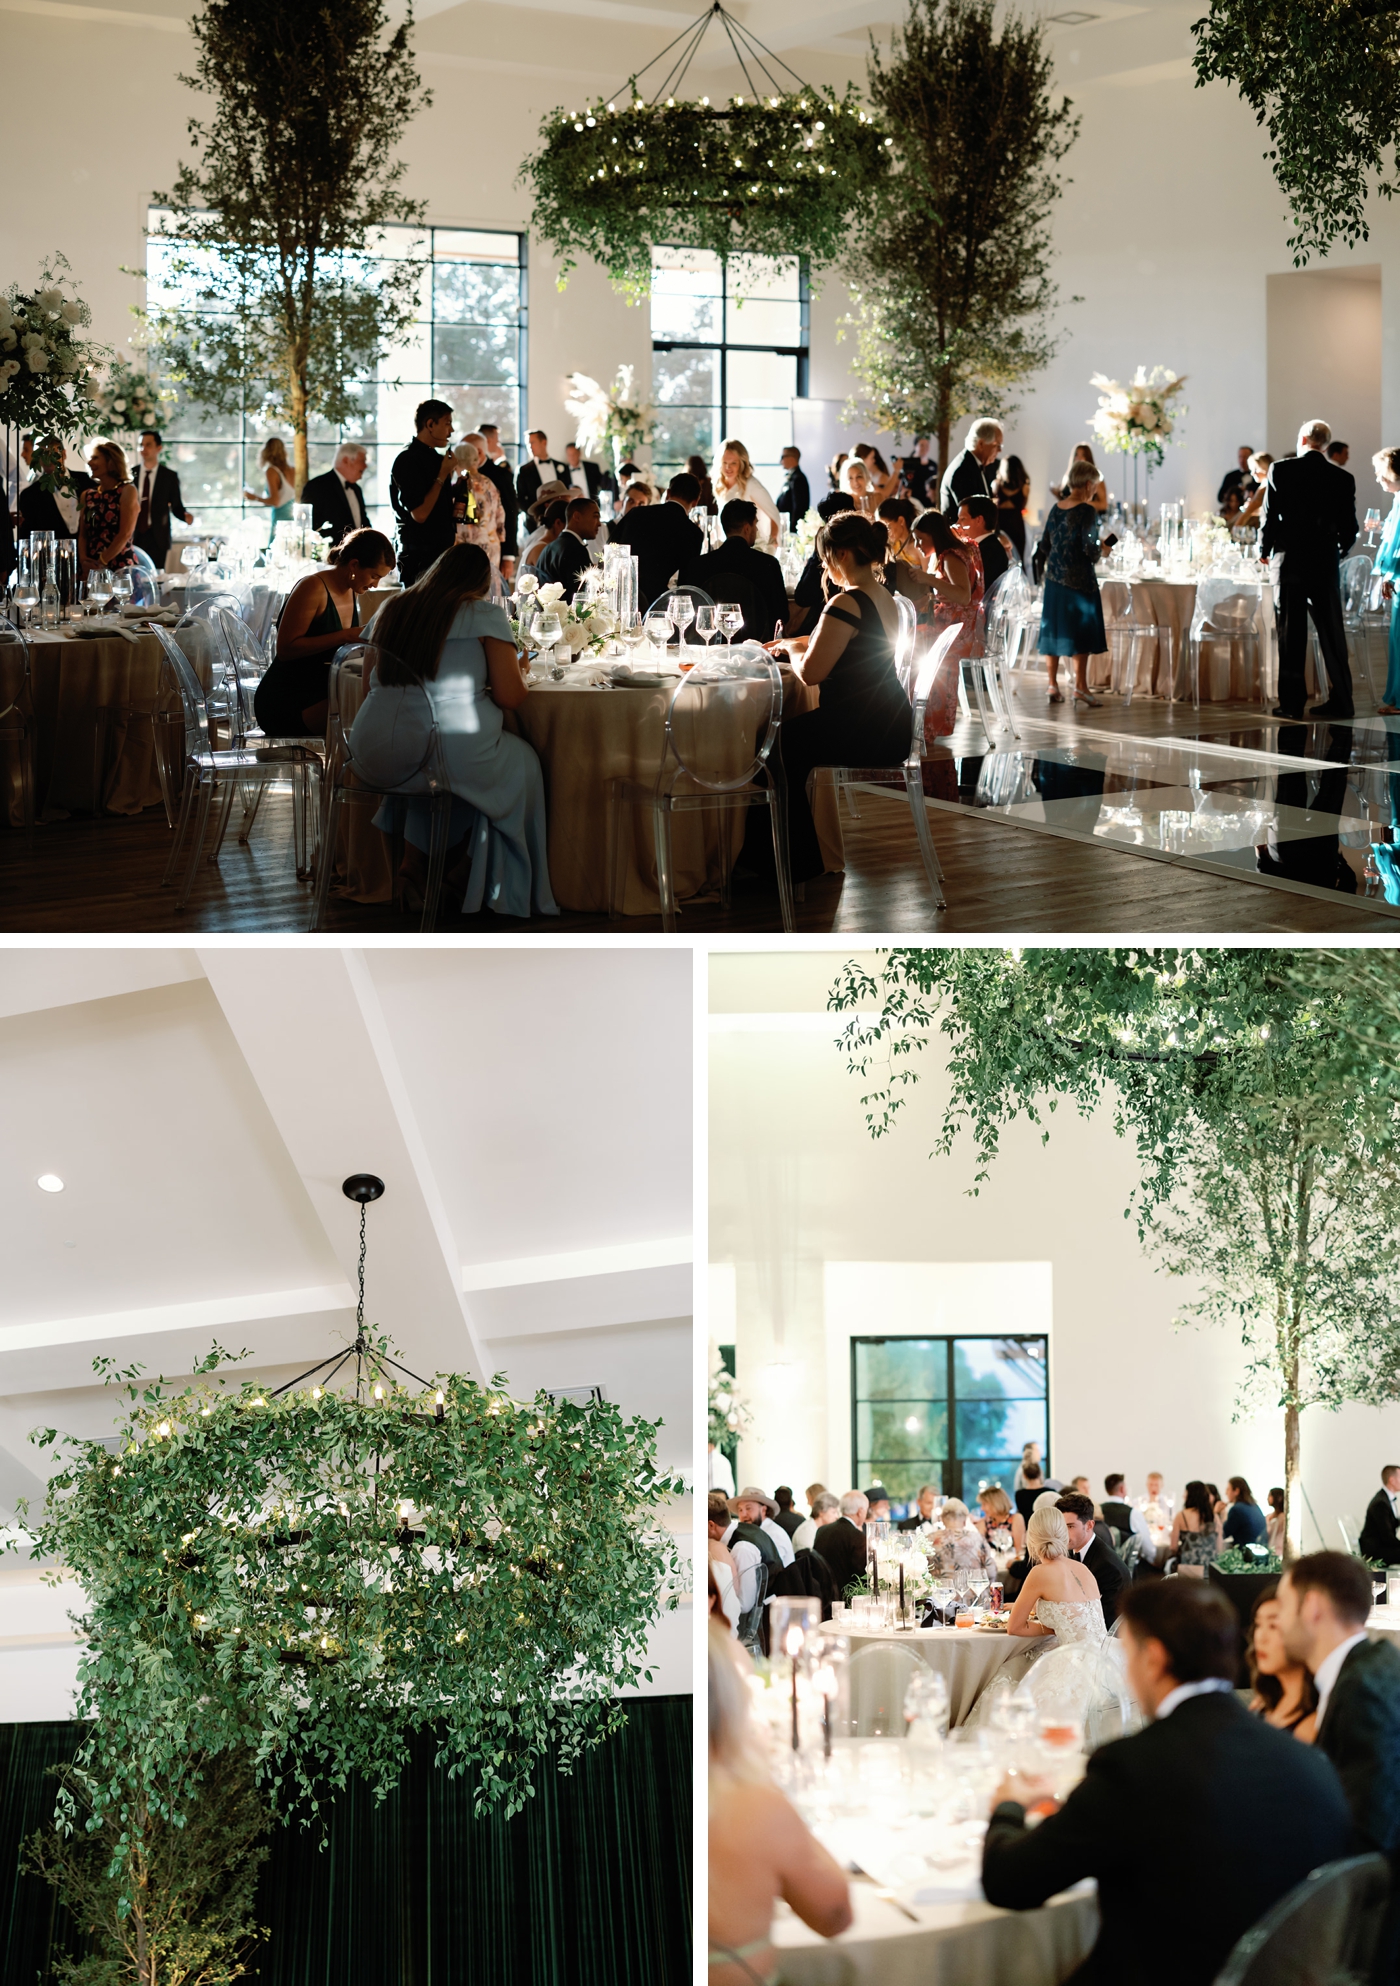 Large trees and greenery for a wedding reception in Austin, Texas - at The Arlo